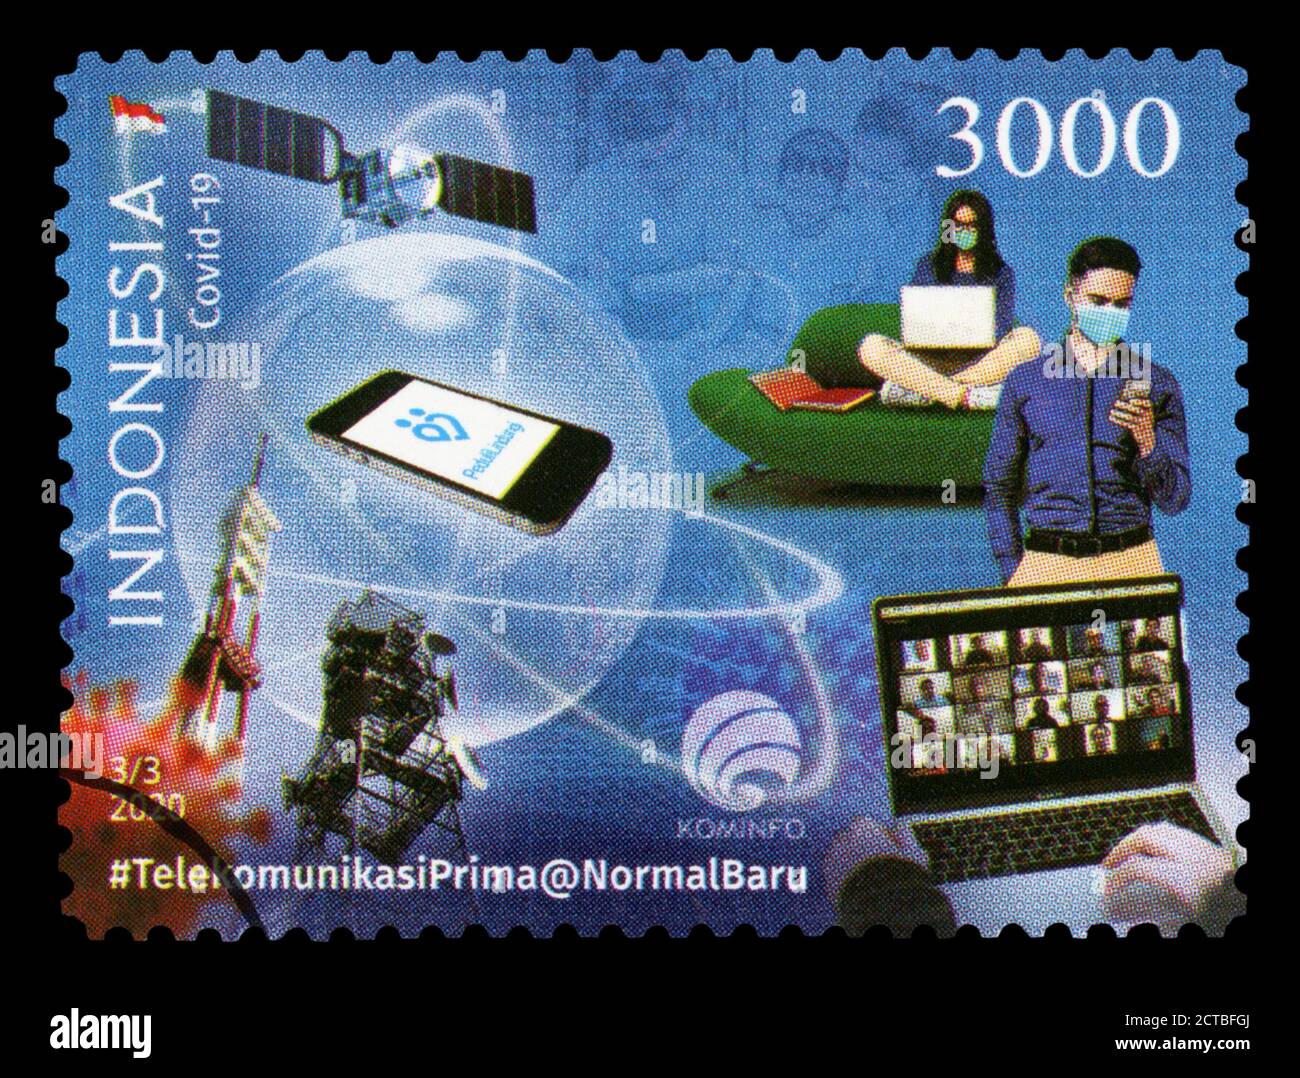 INDONESIA – CIRCA 2020: A postage stamp printed in Indonesia showing an image life during the pandemic of COvid-19, circa 2020. Stock Photo